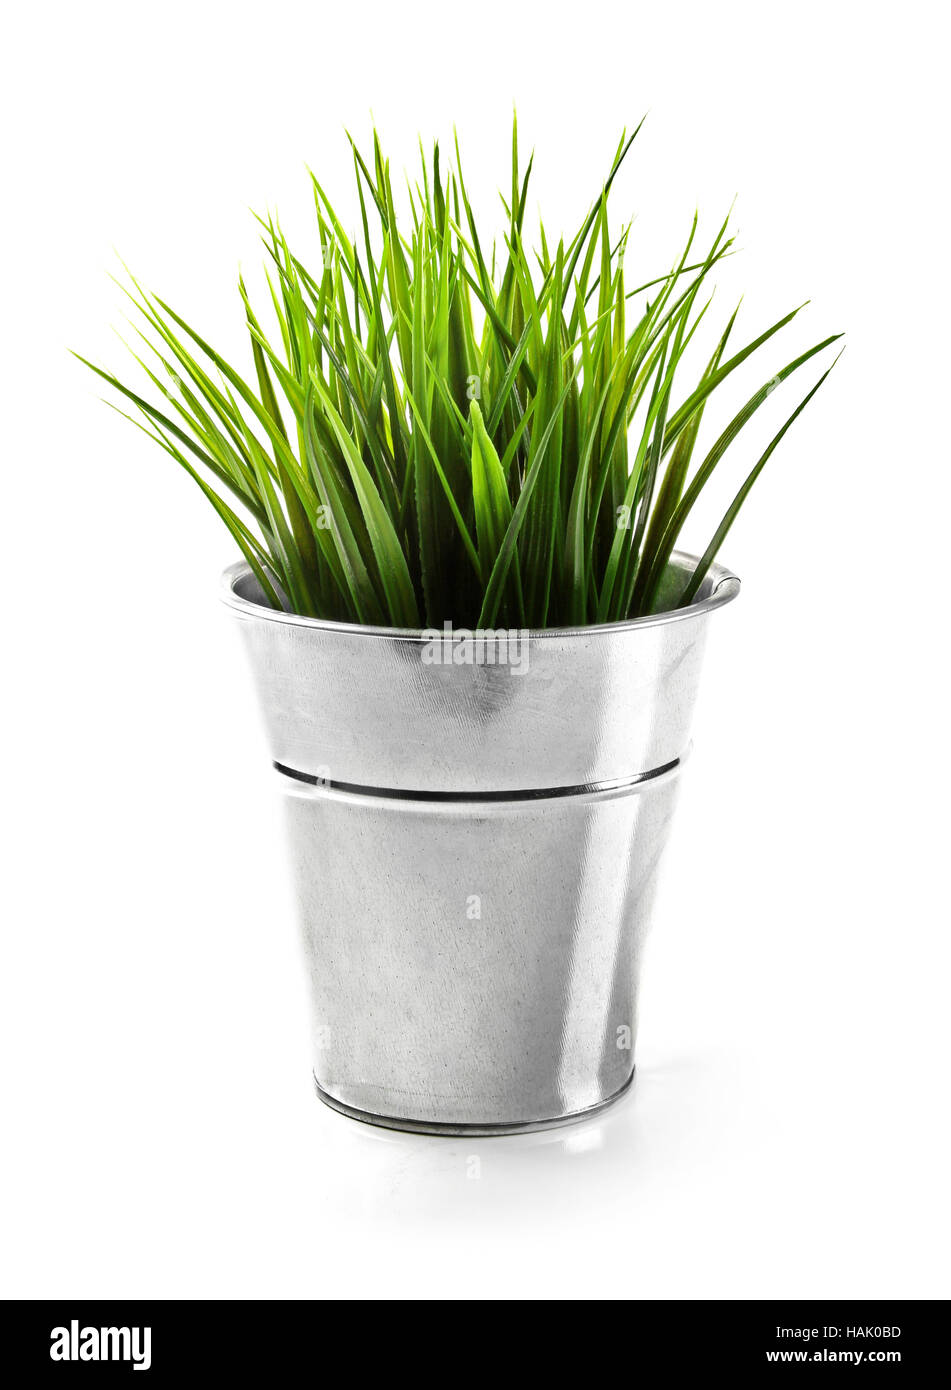 green grass in metal bucket isolated on white Stock Photo